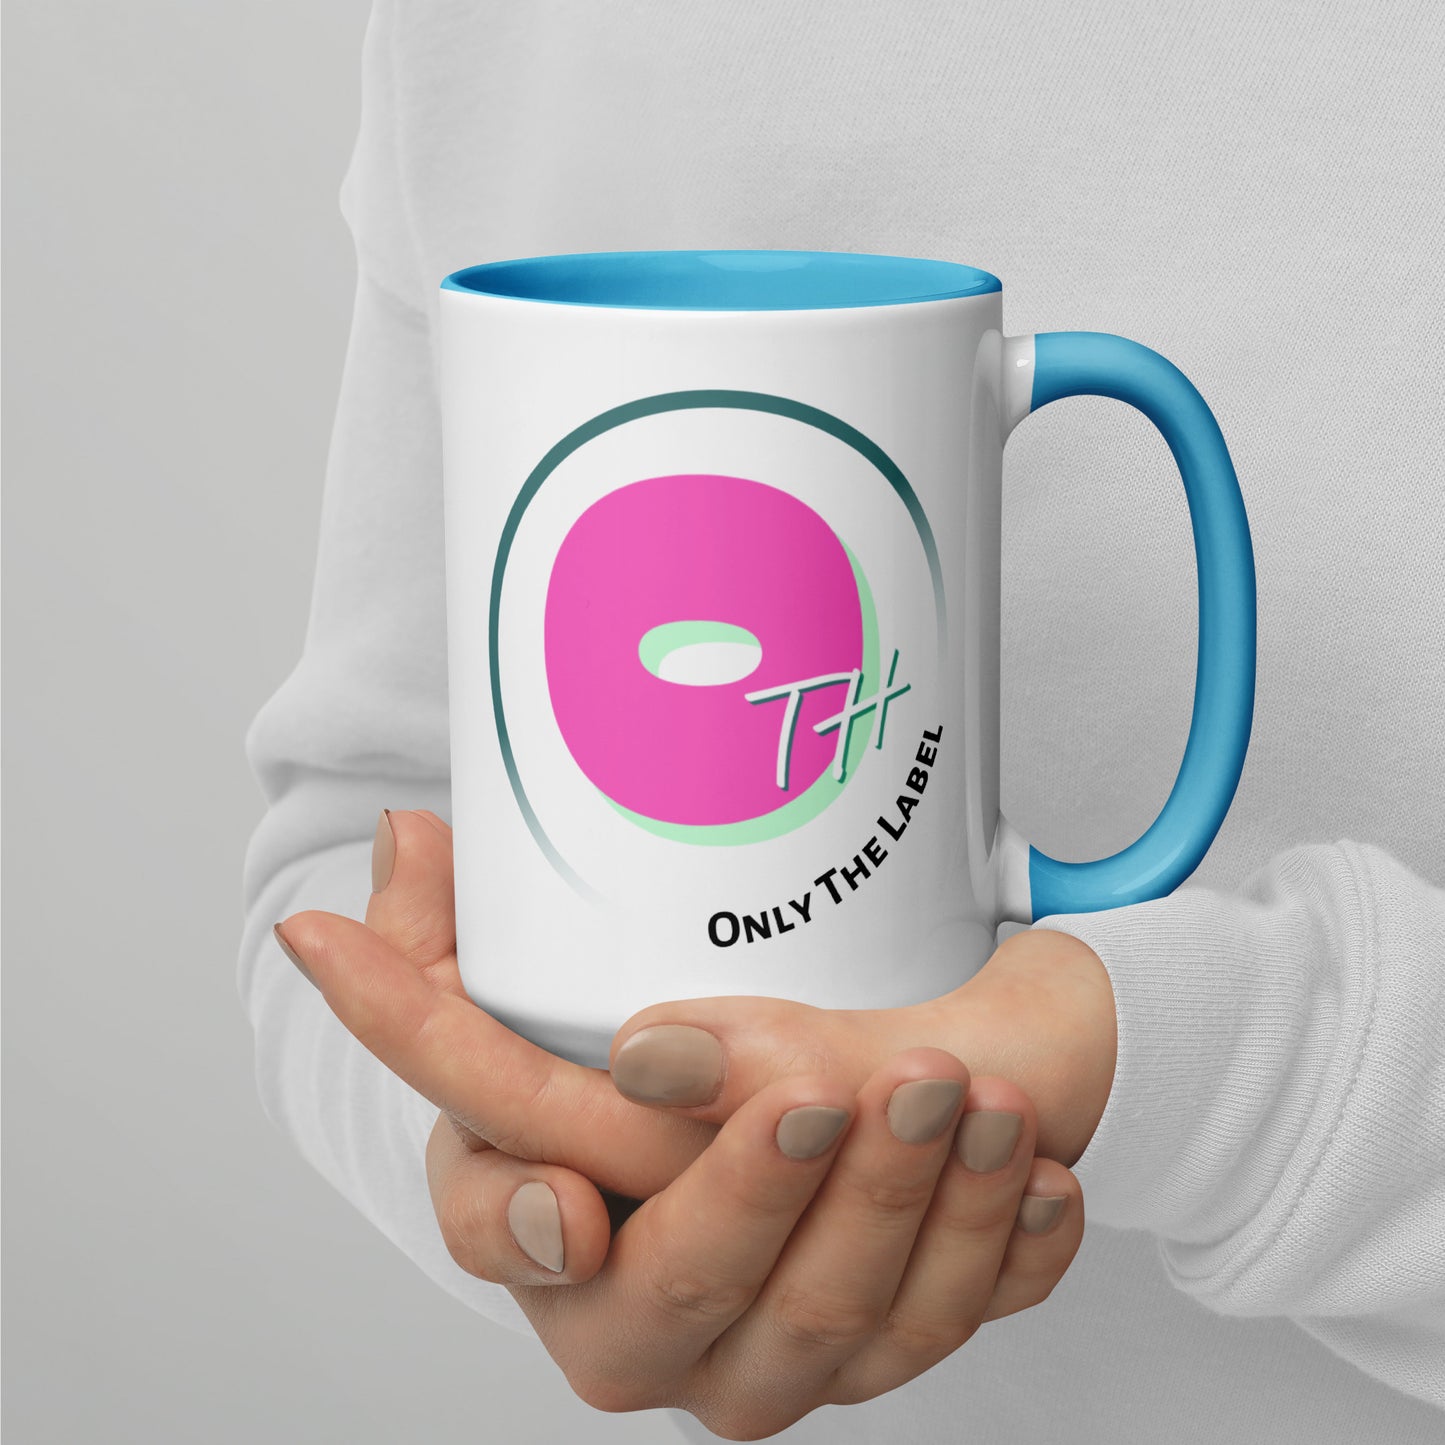 Only The Label Mug With Color Inside